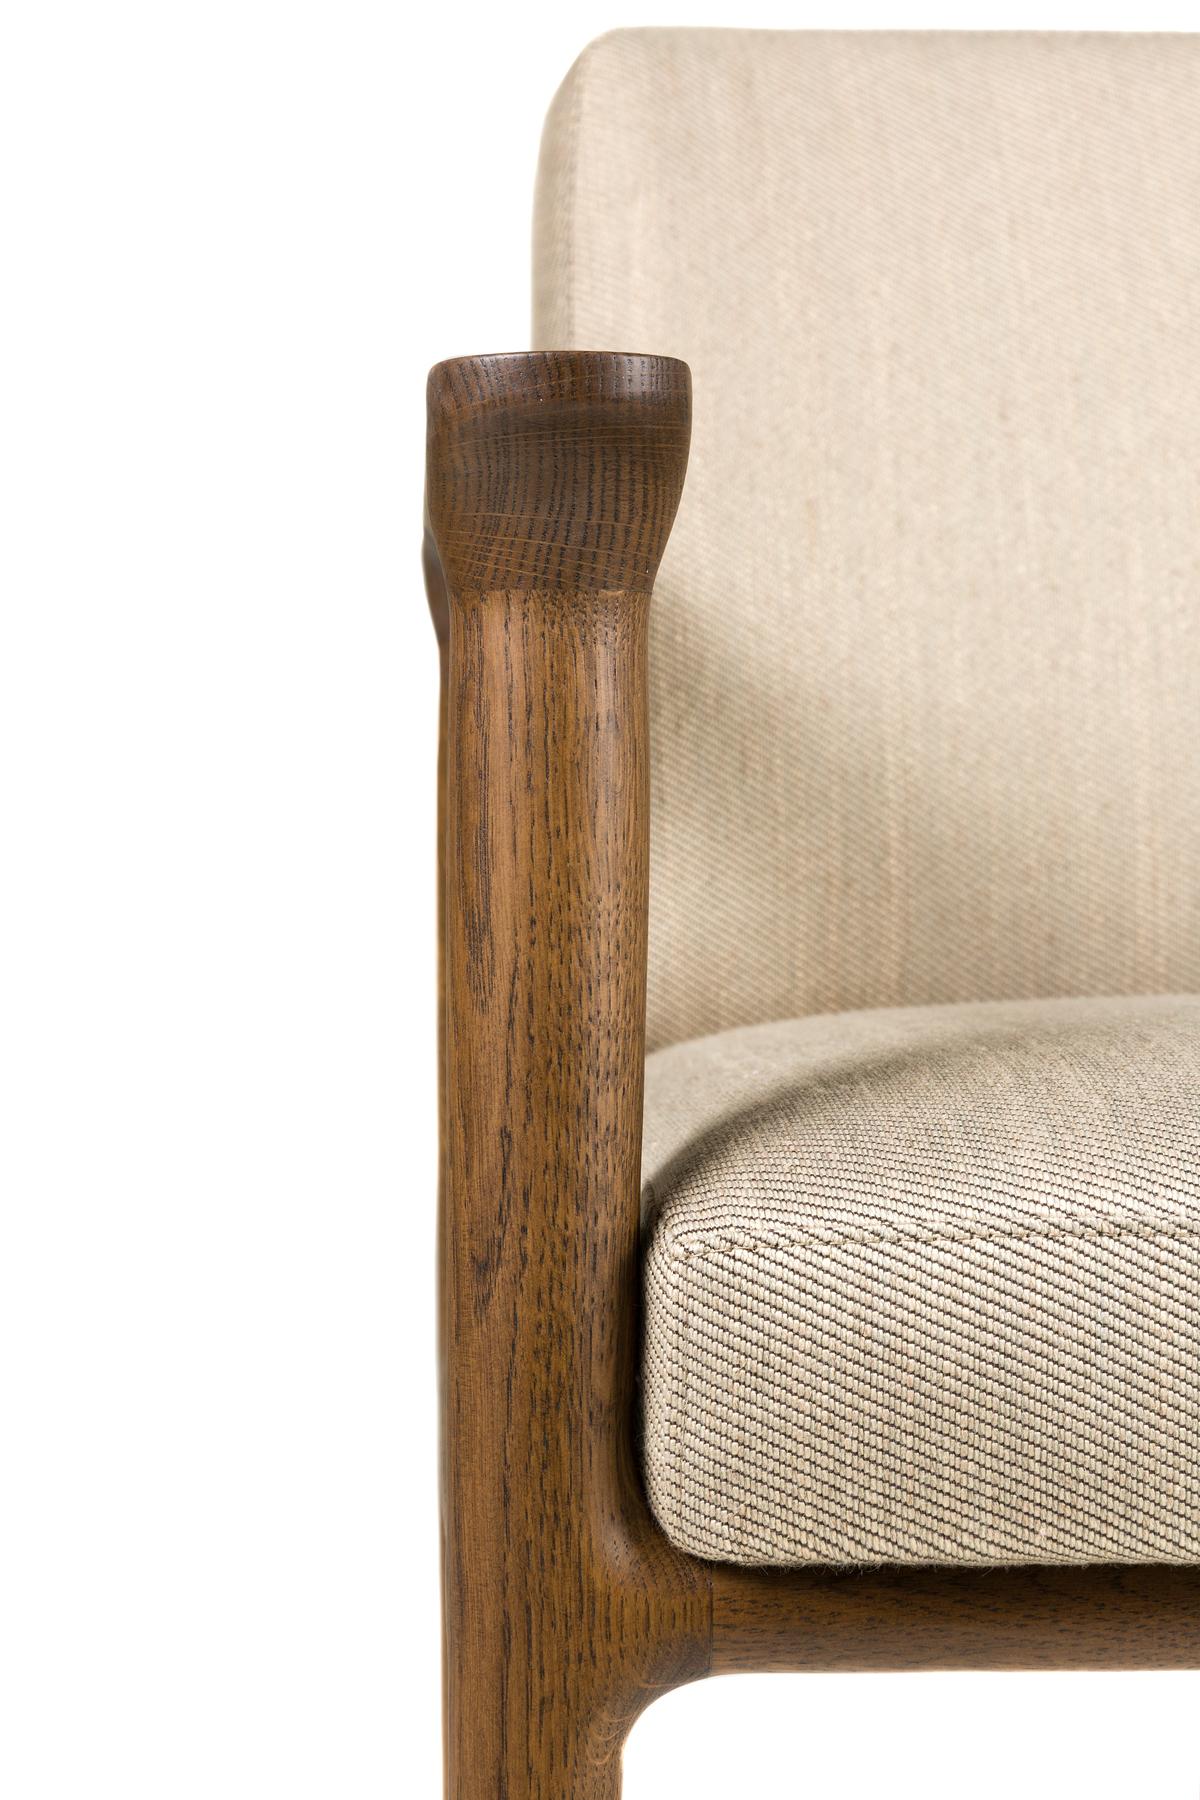 Modern Moooi Zio Dining Chair in Oray Ronan Upholstery with Oak Stained Cinnamon Frame For Sale